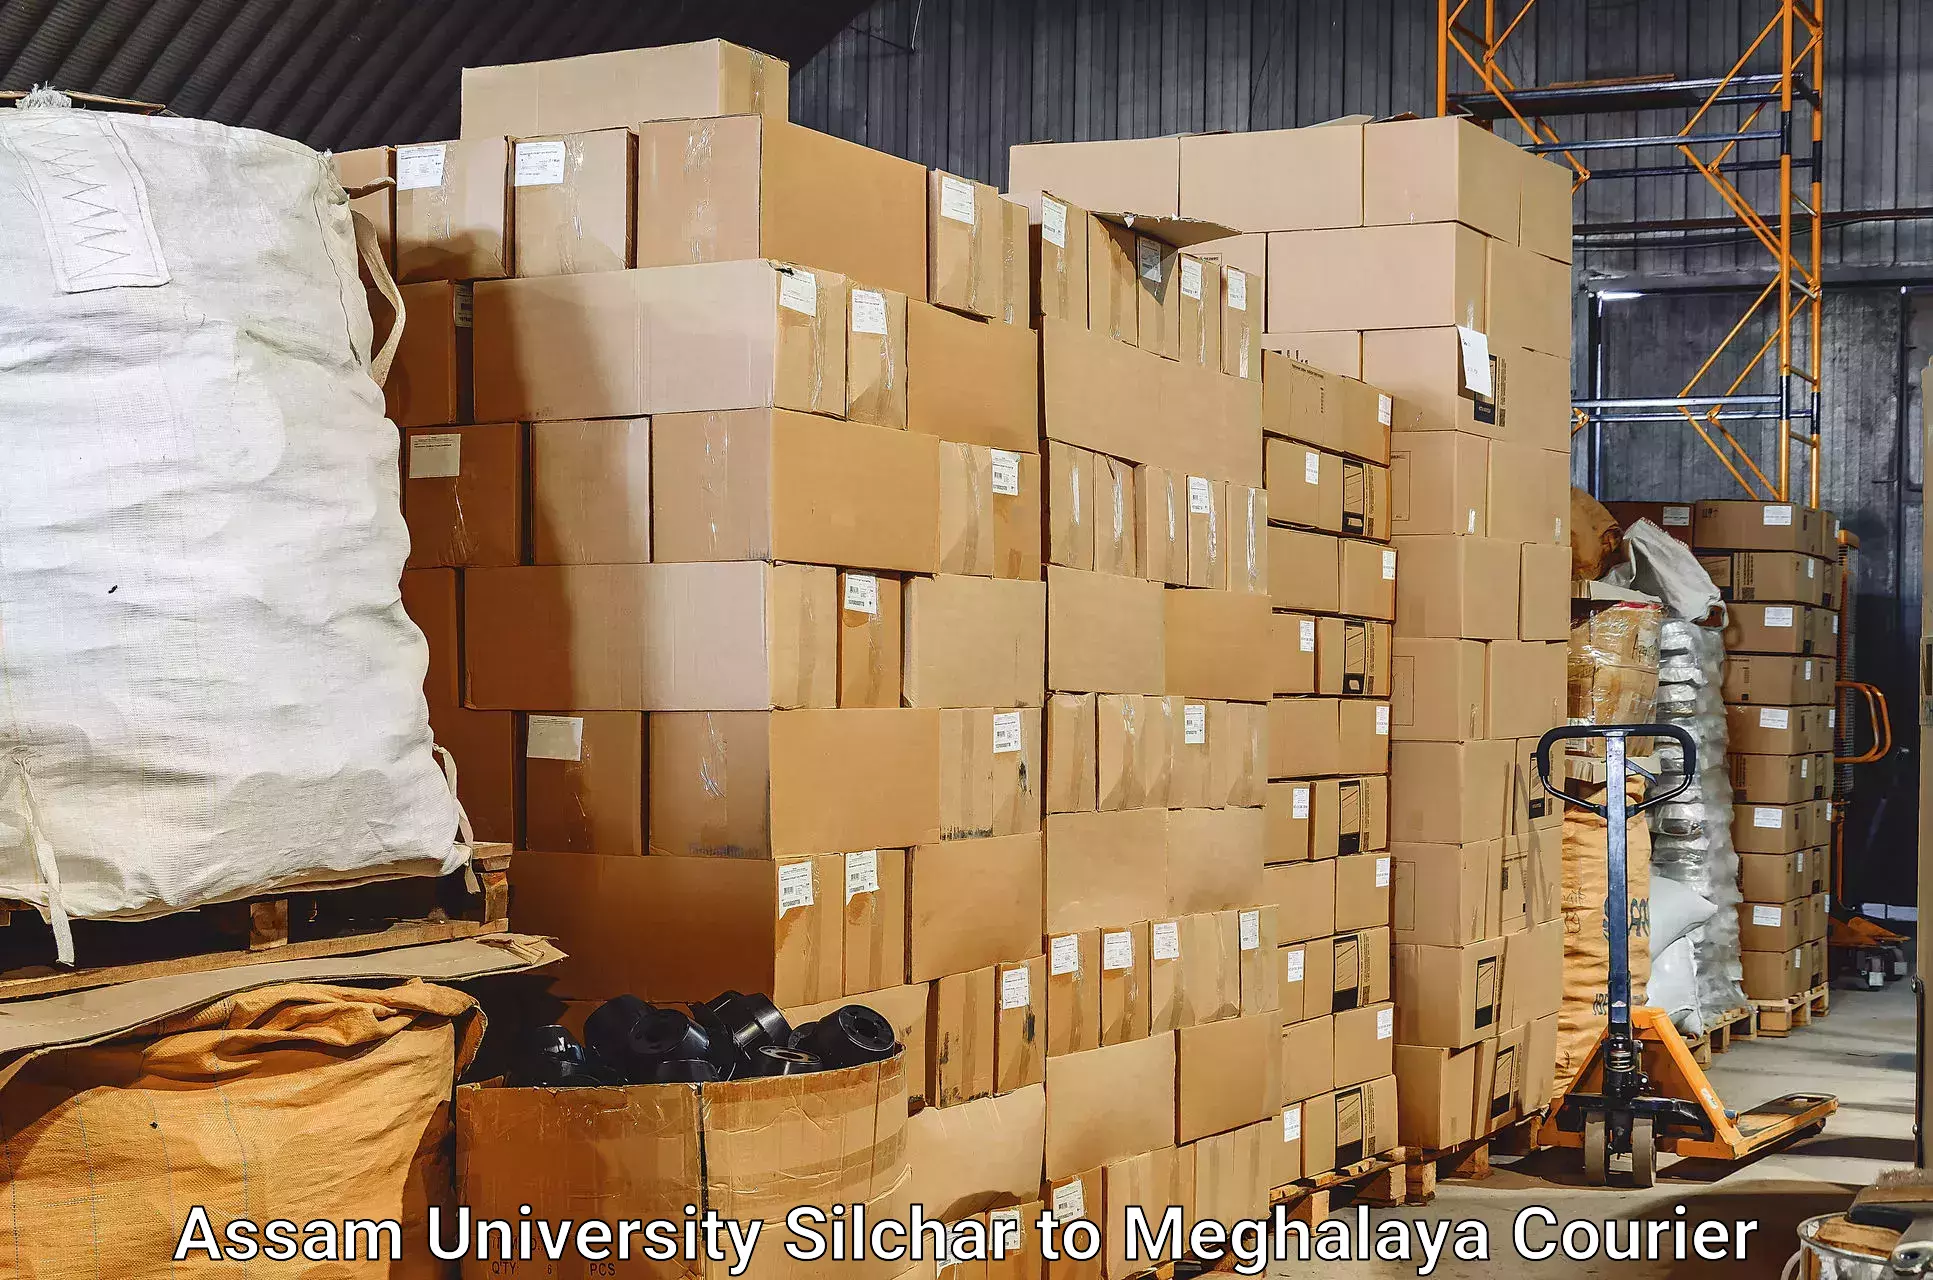 Electronic items luggage shipping in Assam University Silchar to Ri Bhoi